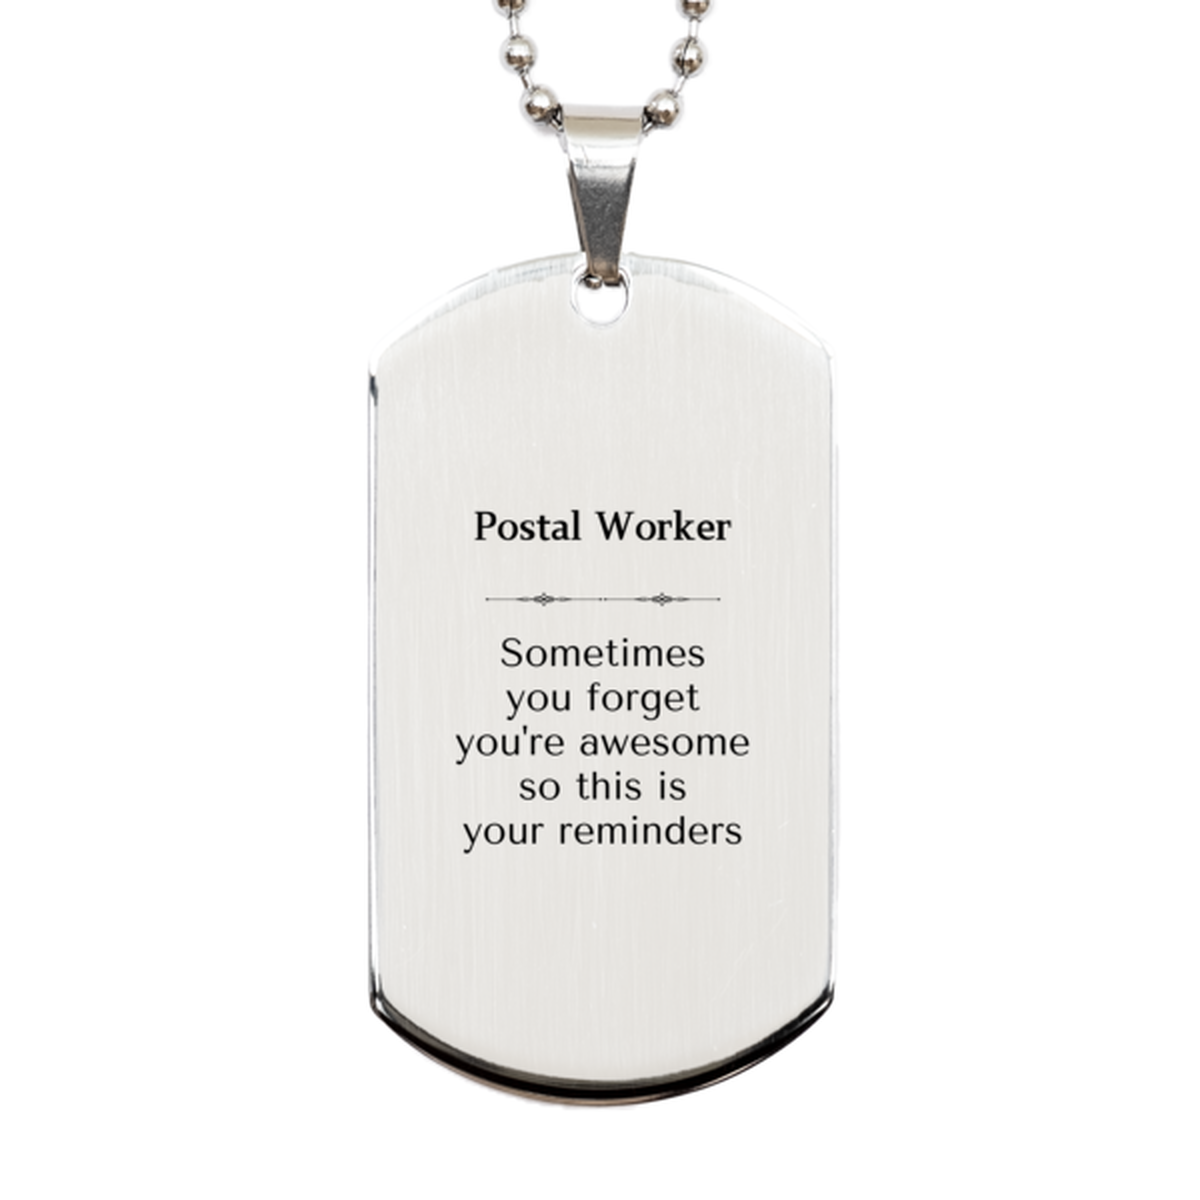 Sentimental Postal Worker Silver Dog Tag, Postal Worker Sometimes you forget you're awesome so this is your reminders, Graduation Christmas Birthday Gifts for Postal Worker, Men, Women, Coworkers